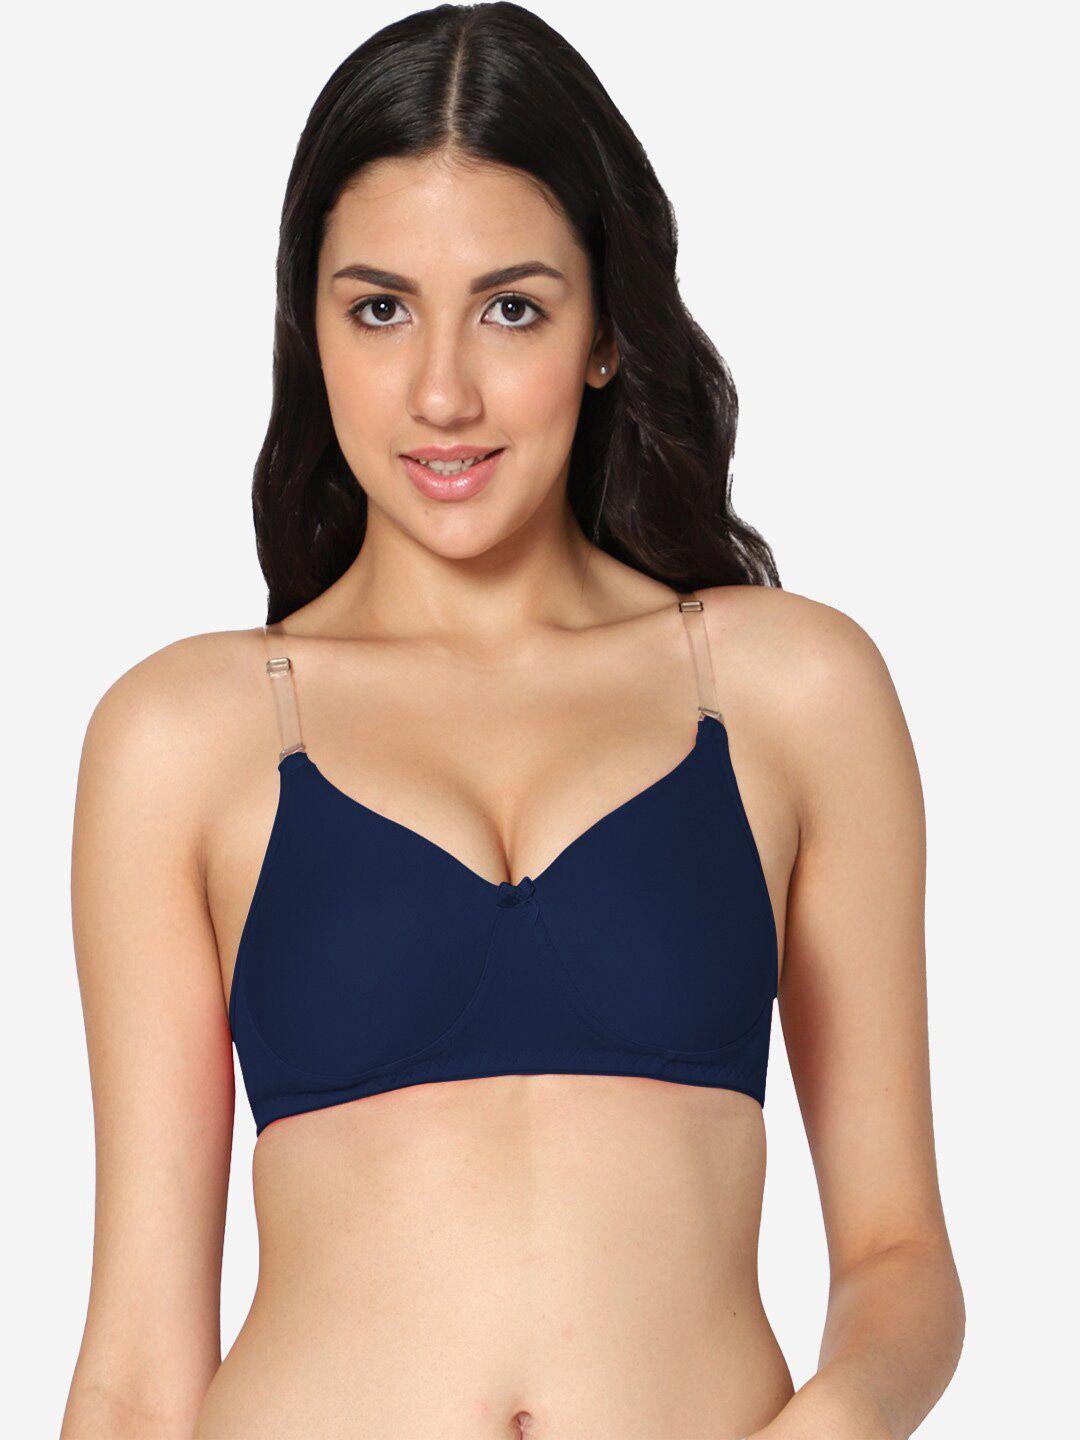 in-care-seamless-full-coverage-heavily-padded-non-wired-all-day-comfort-cotton-push-up-bra